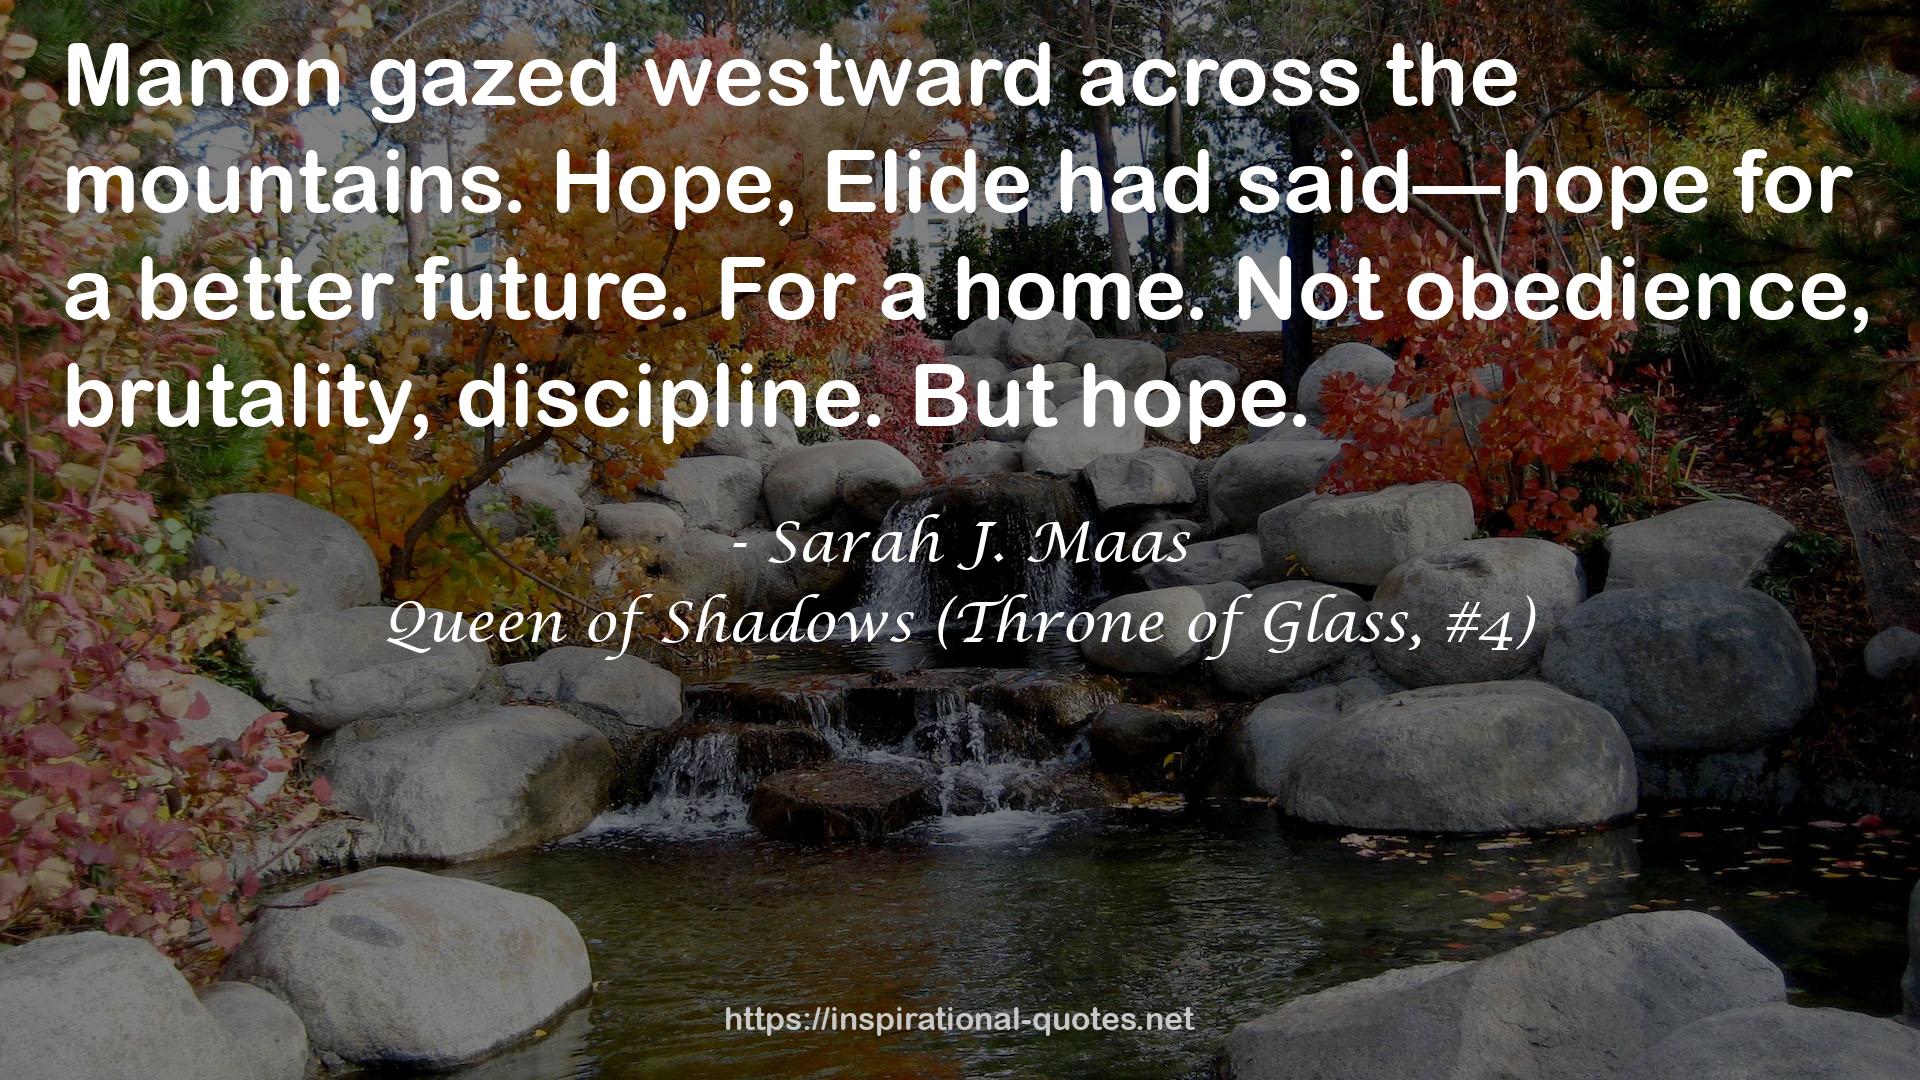 Queen of Shadows (Throne of Glass, #4) QUOTES